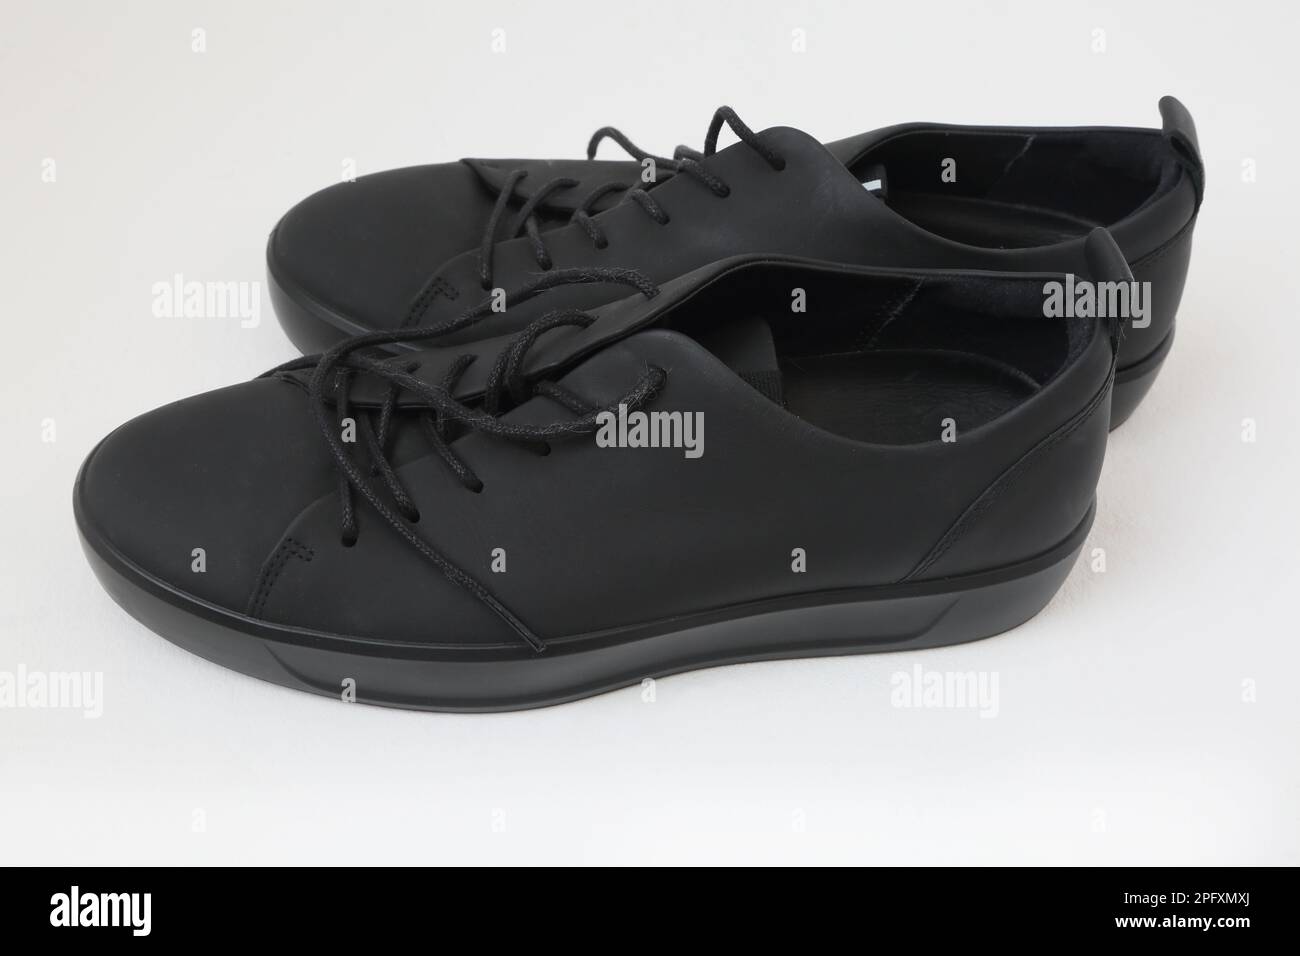 A Pair of Men's Formal Black Leather Ecco Lace up Shoes Stock Photo